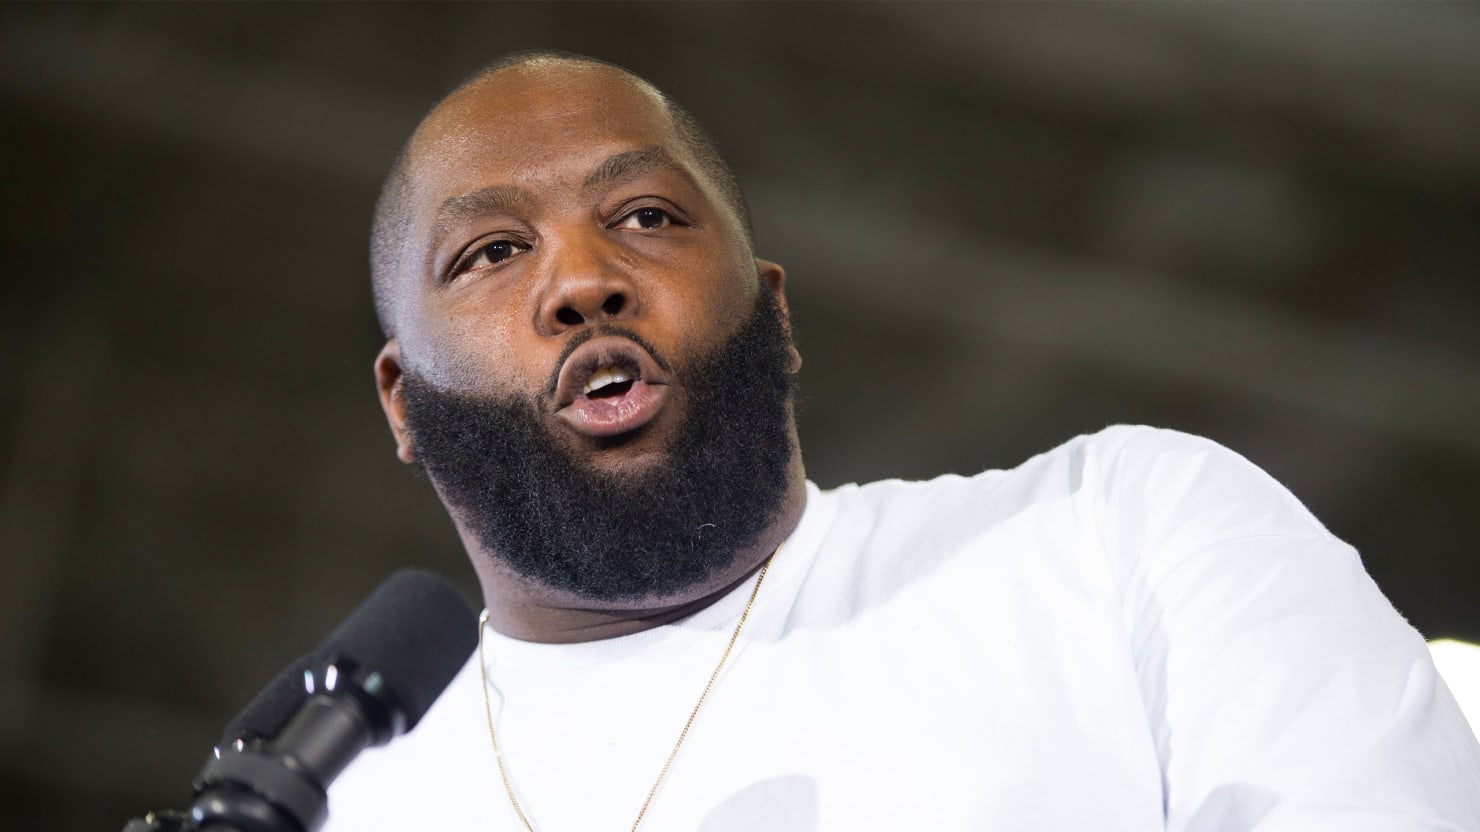 Killer Mike, 2 Chainz Urge Atlanta City Council To Reject Ordinance That Aims To Reduce Nightlife Crime